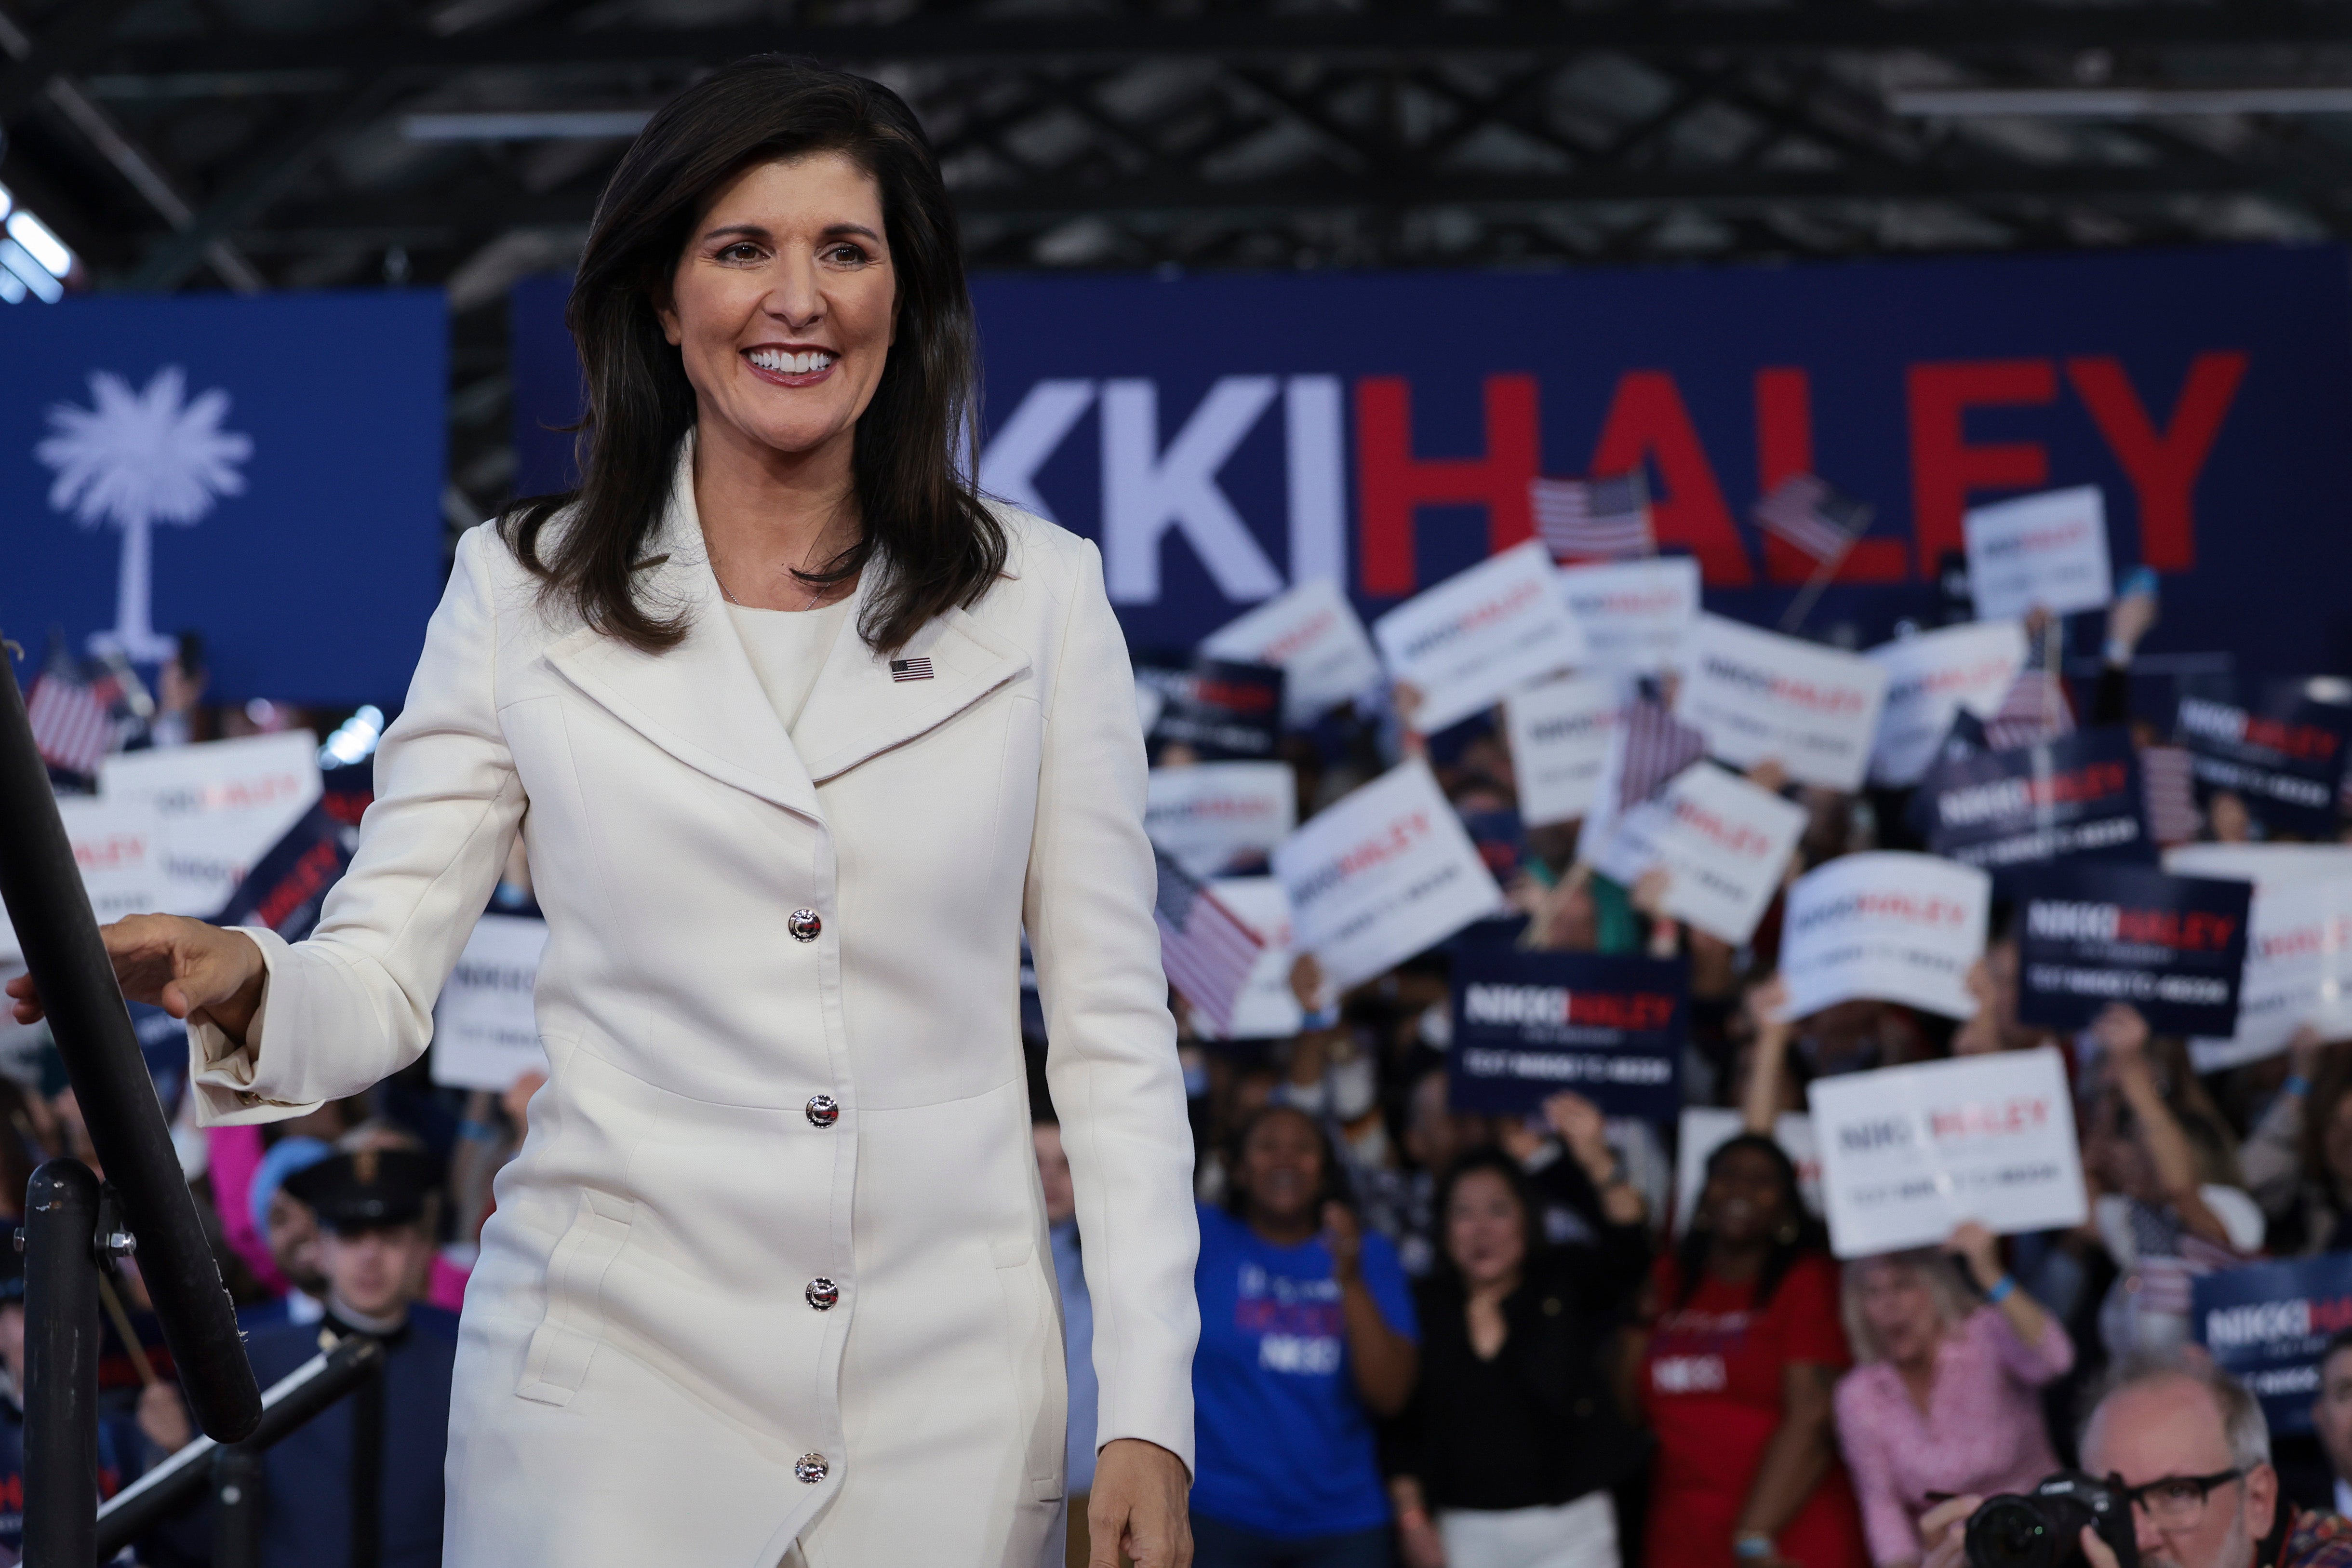 Nikki Haley held her first campaign event on 15 February 2023, a day after she announced her candidacy